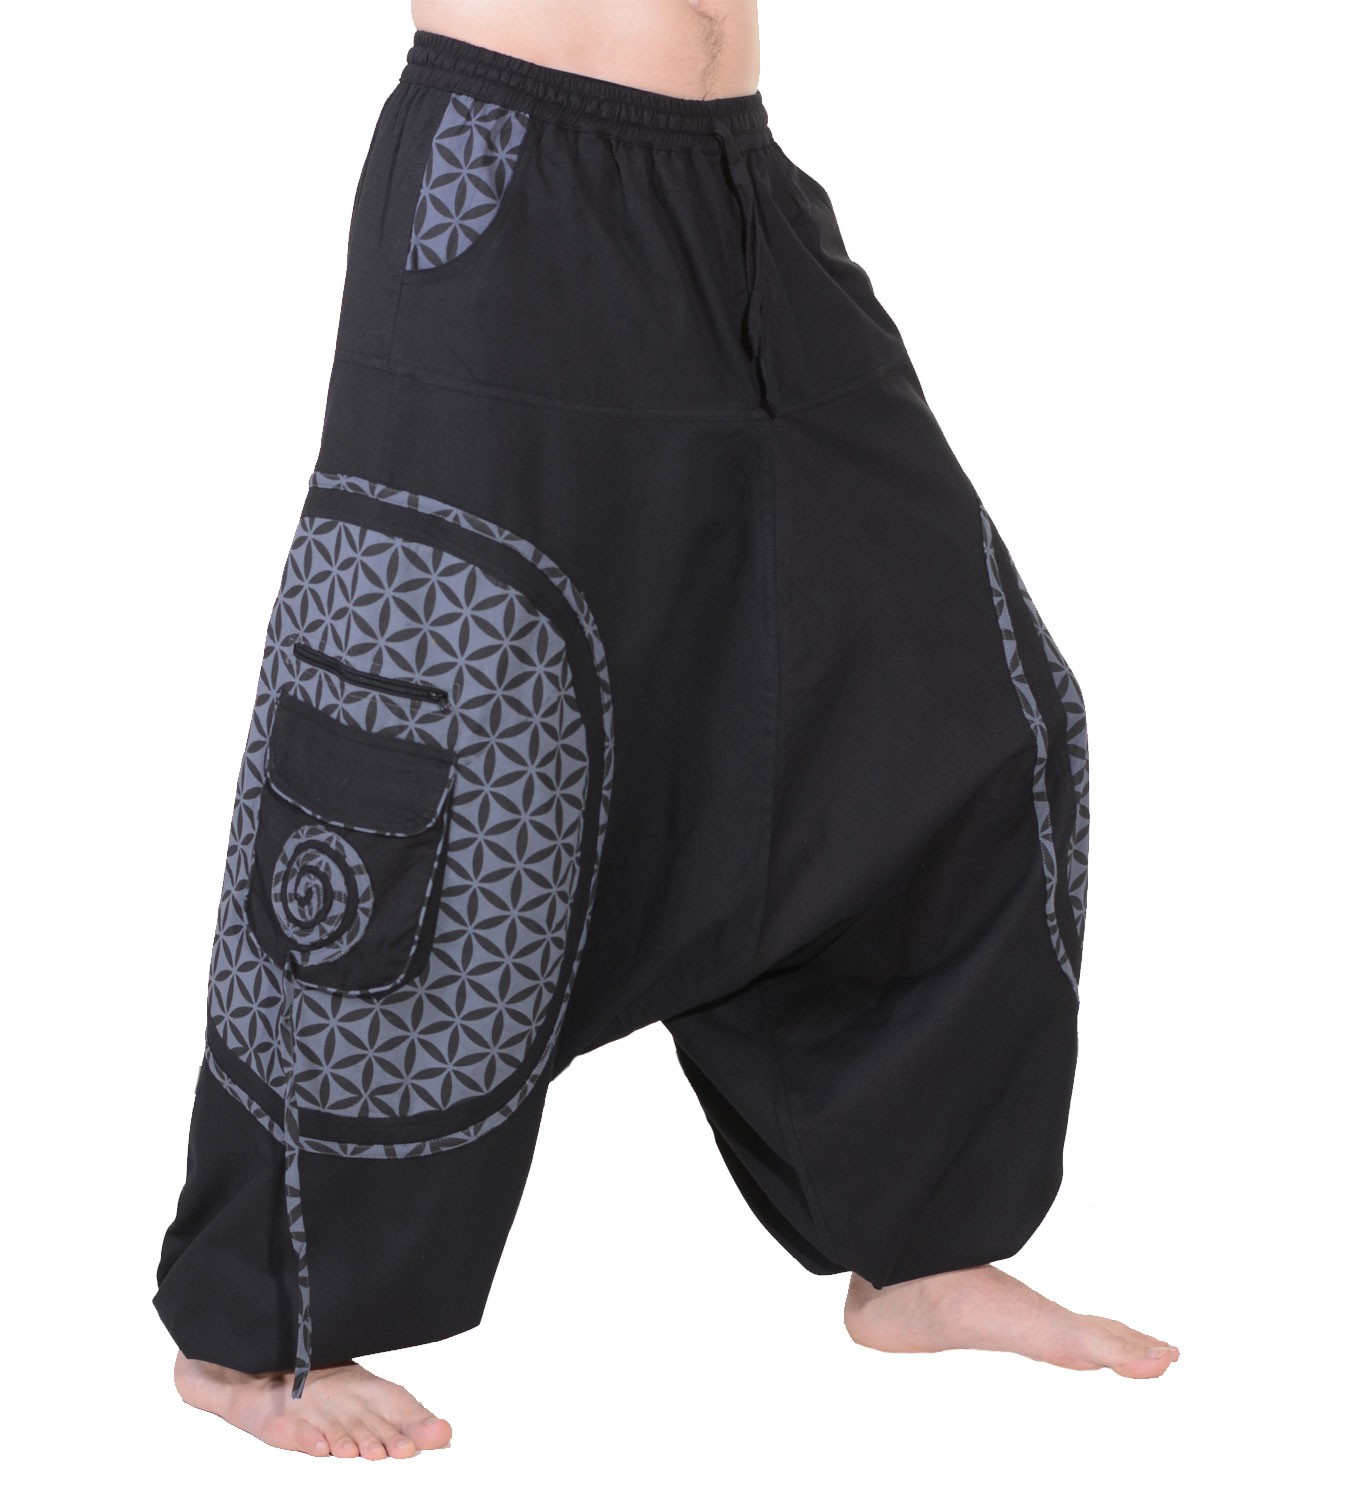 Trendy Harem pants with funky Pattern - Goa Hippie Trousers